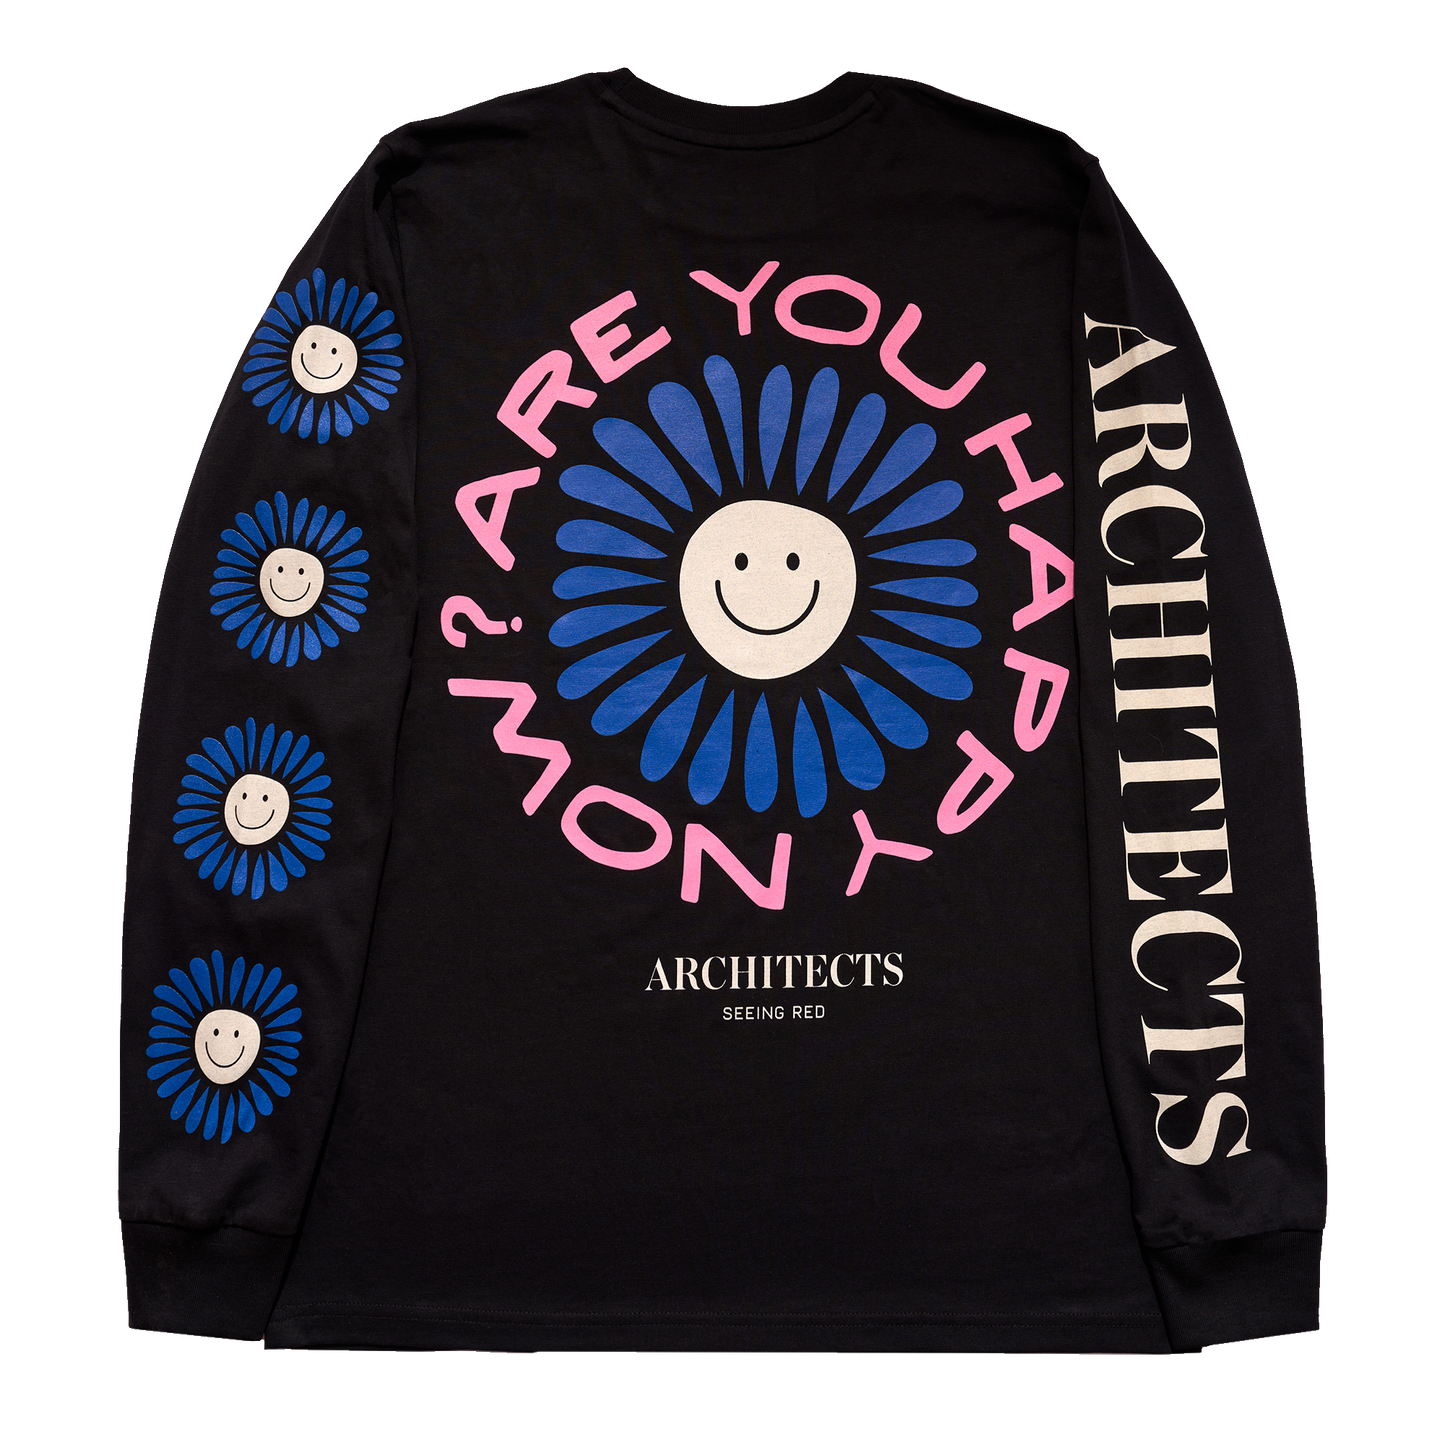 Are You Happy Now? (Black) L/S T-shirt